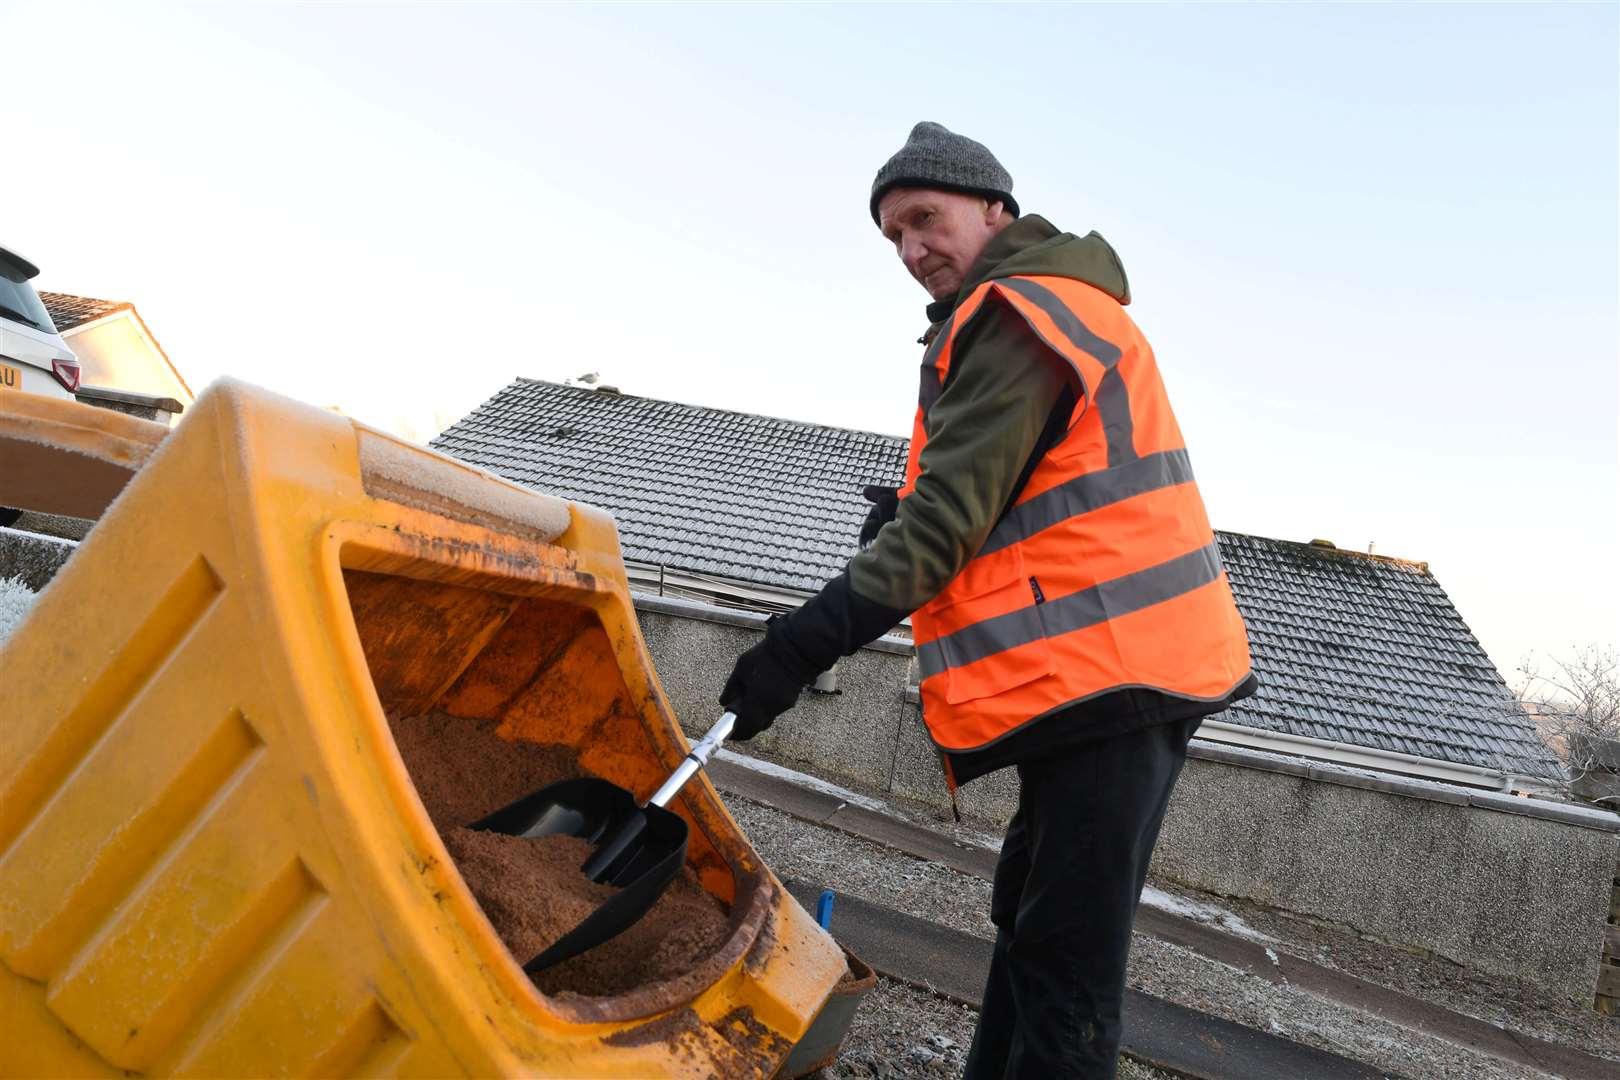 Bill Anderson has been among the city residents helping his neighbours by gritting in the area where he lives. Picture: Callum Mackay